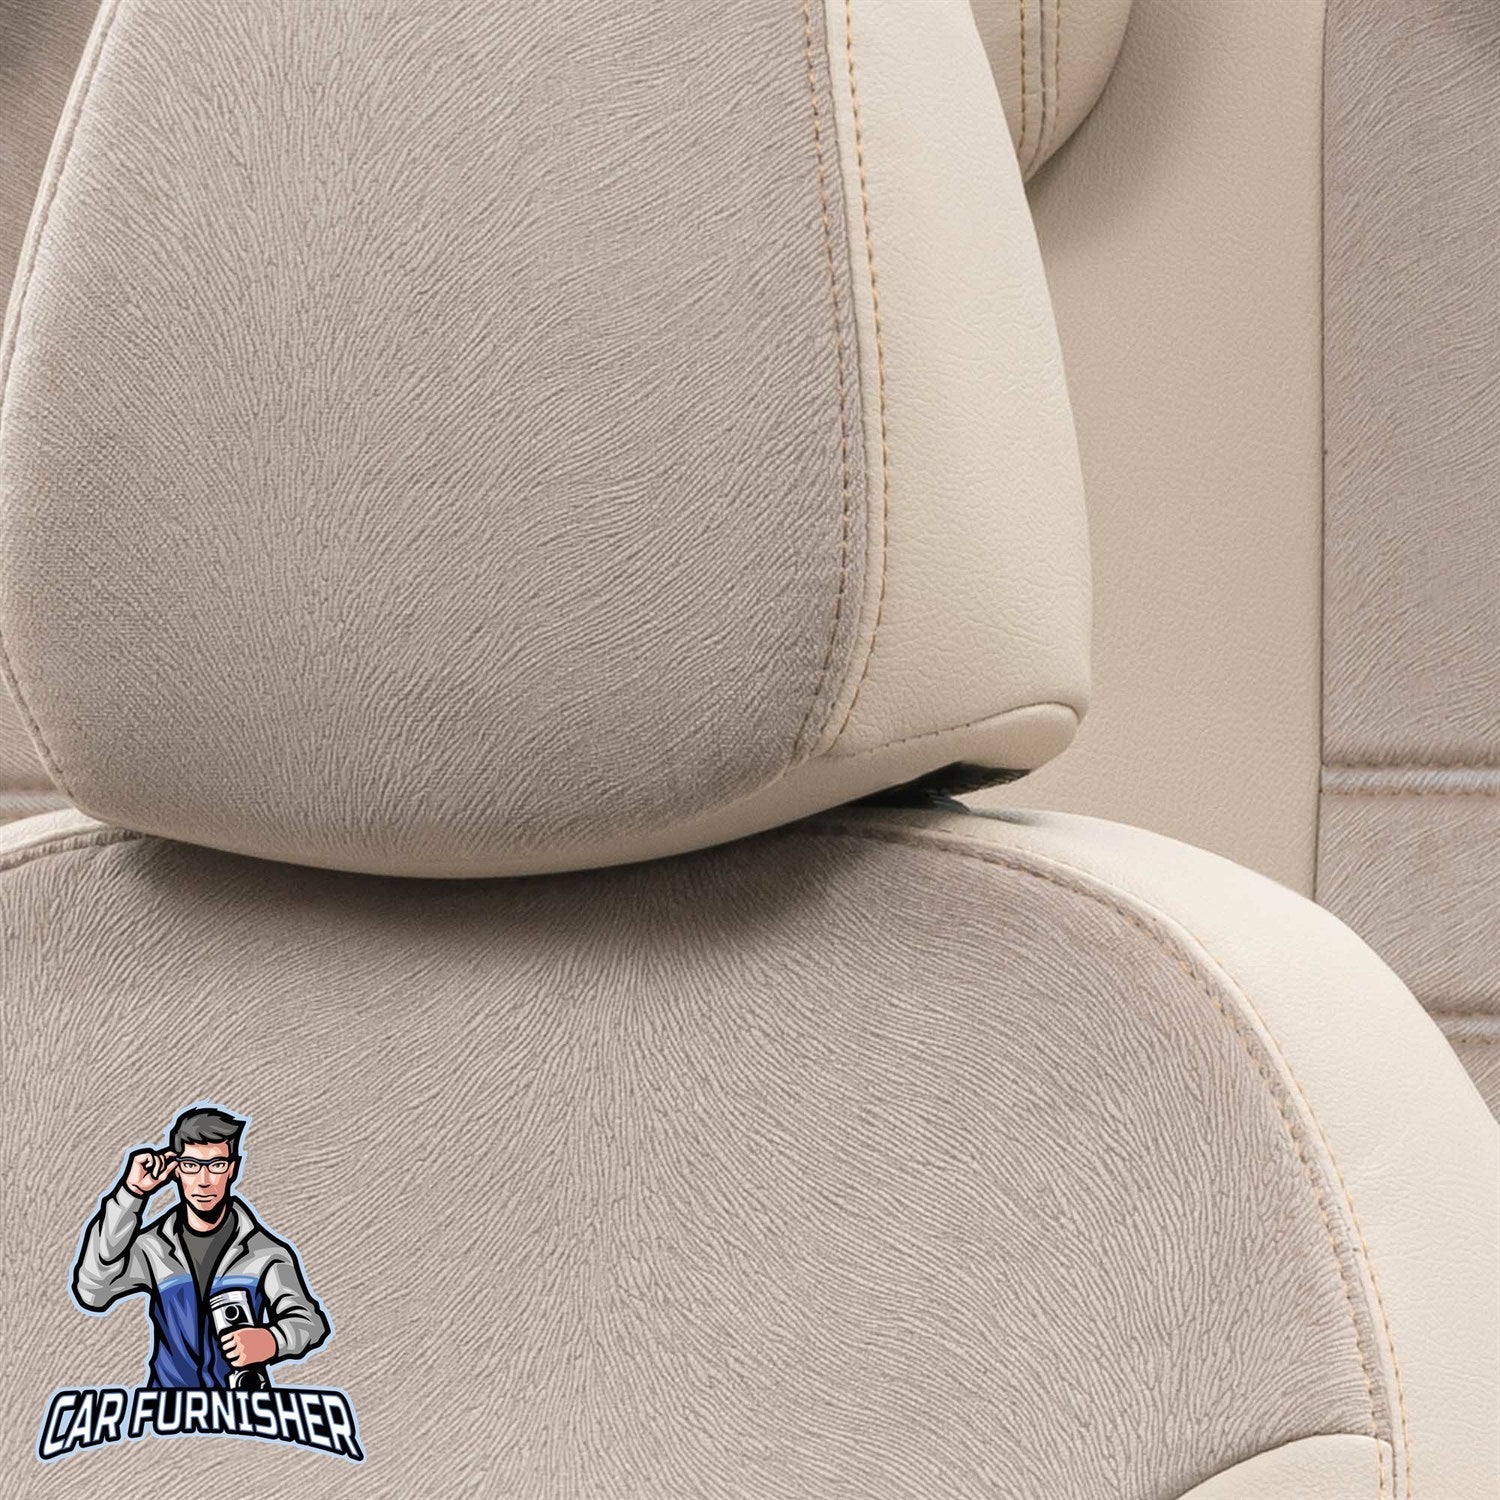 Peugeot 107 Seat Covers London Foal Feather Design Beige Leather & Foal Feather